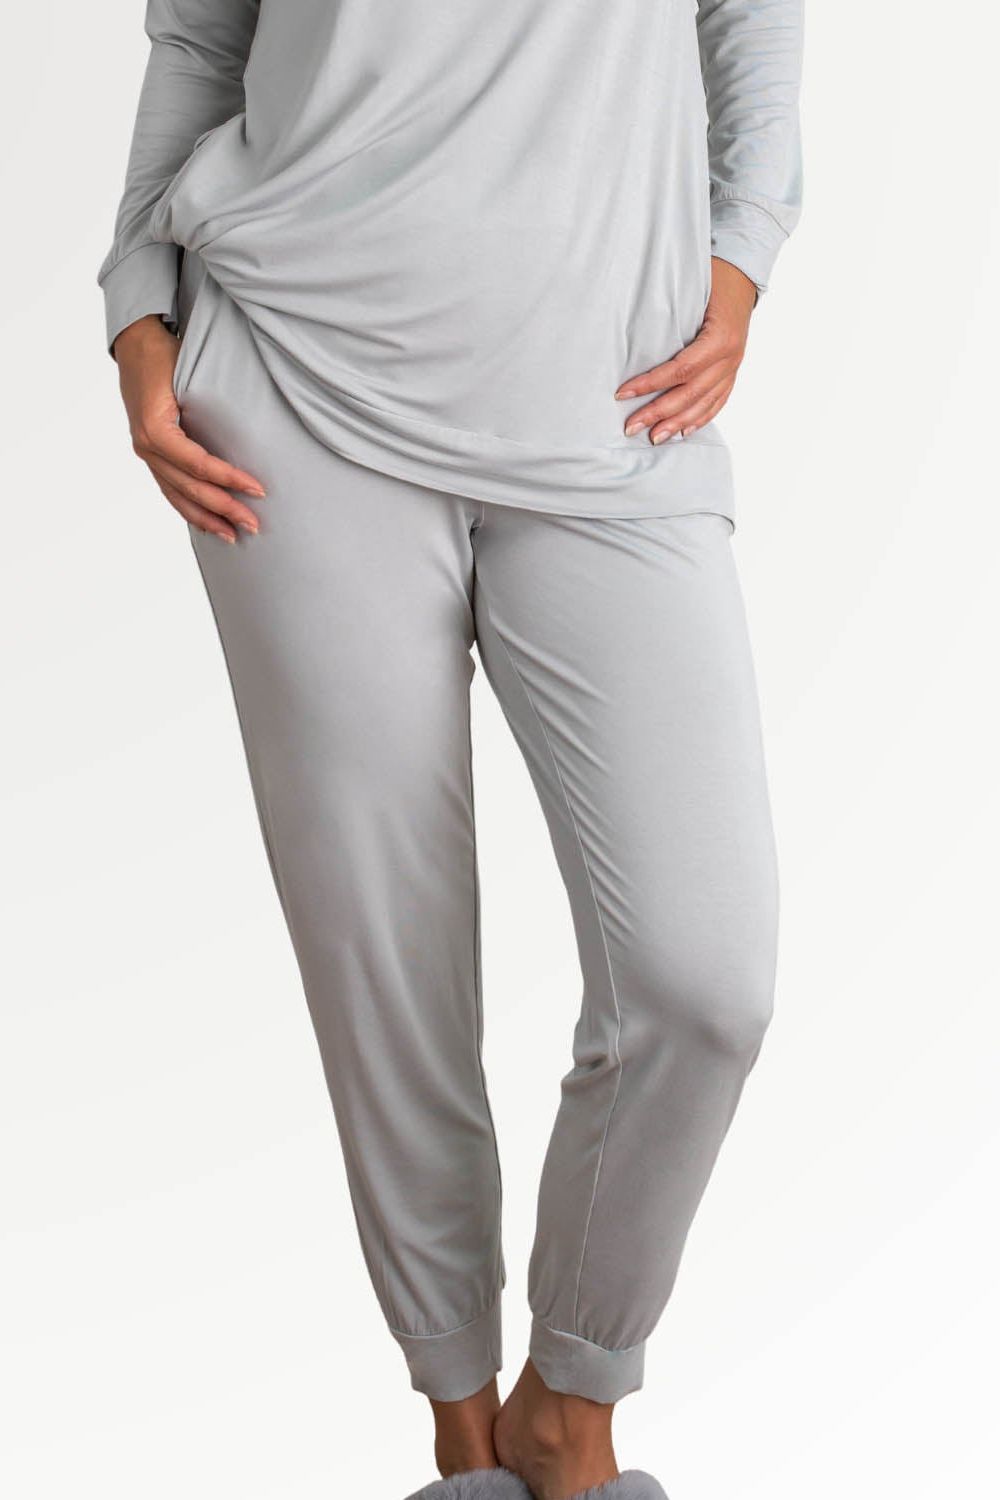 Faceplant Bamboo Cuffed Lounge Pants – Faceplant Dreams